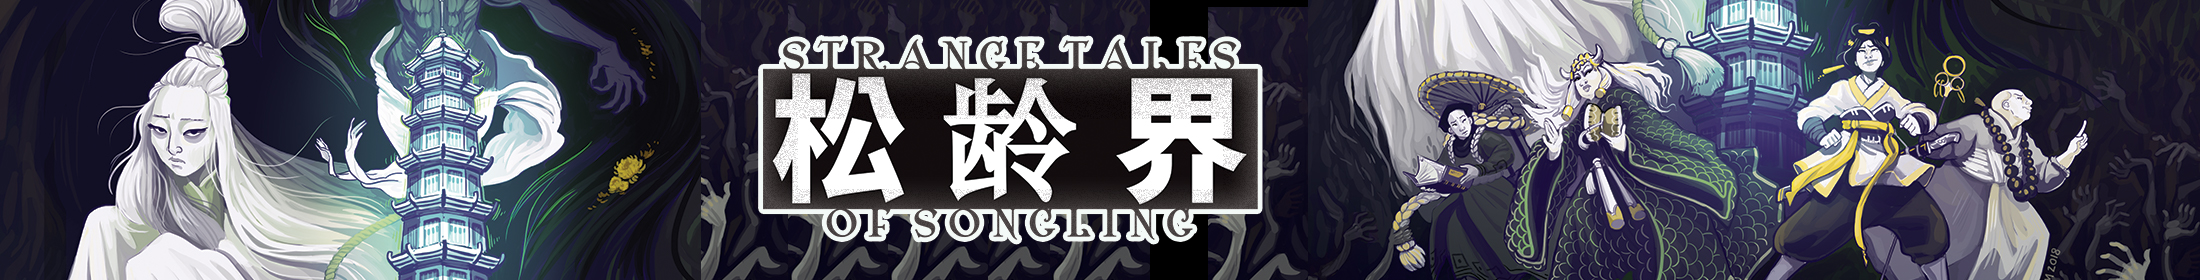 Strange Tales of Songling